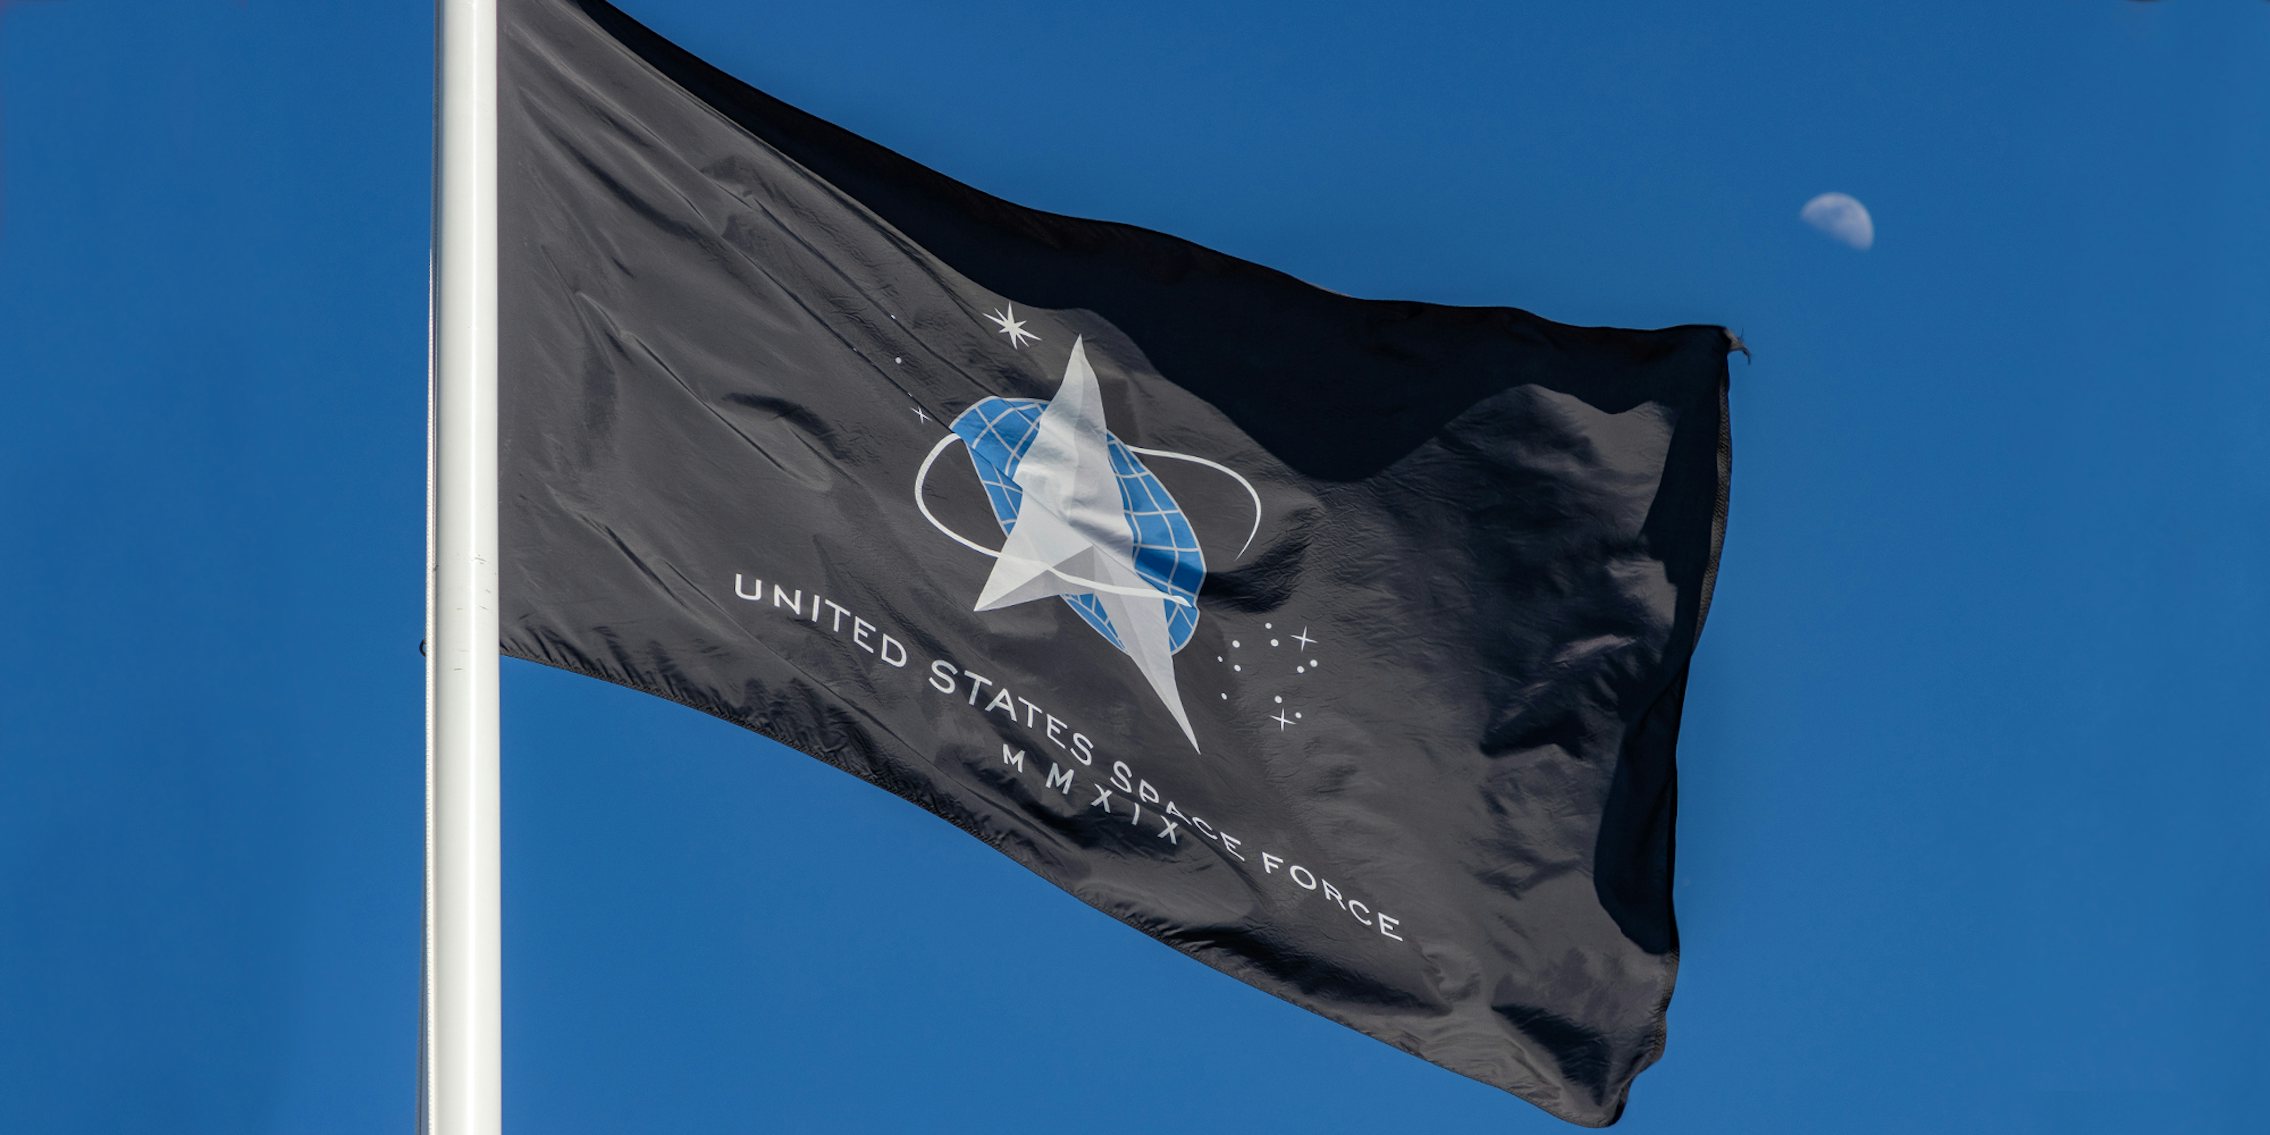 United States Space Force flag in front of blue sky